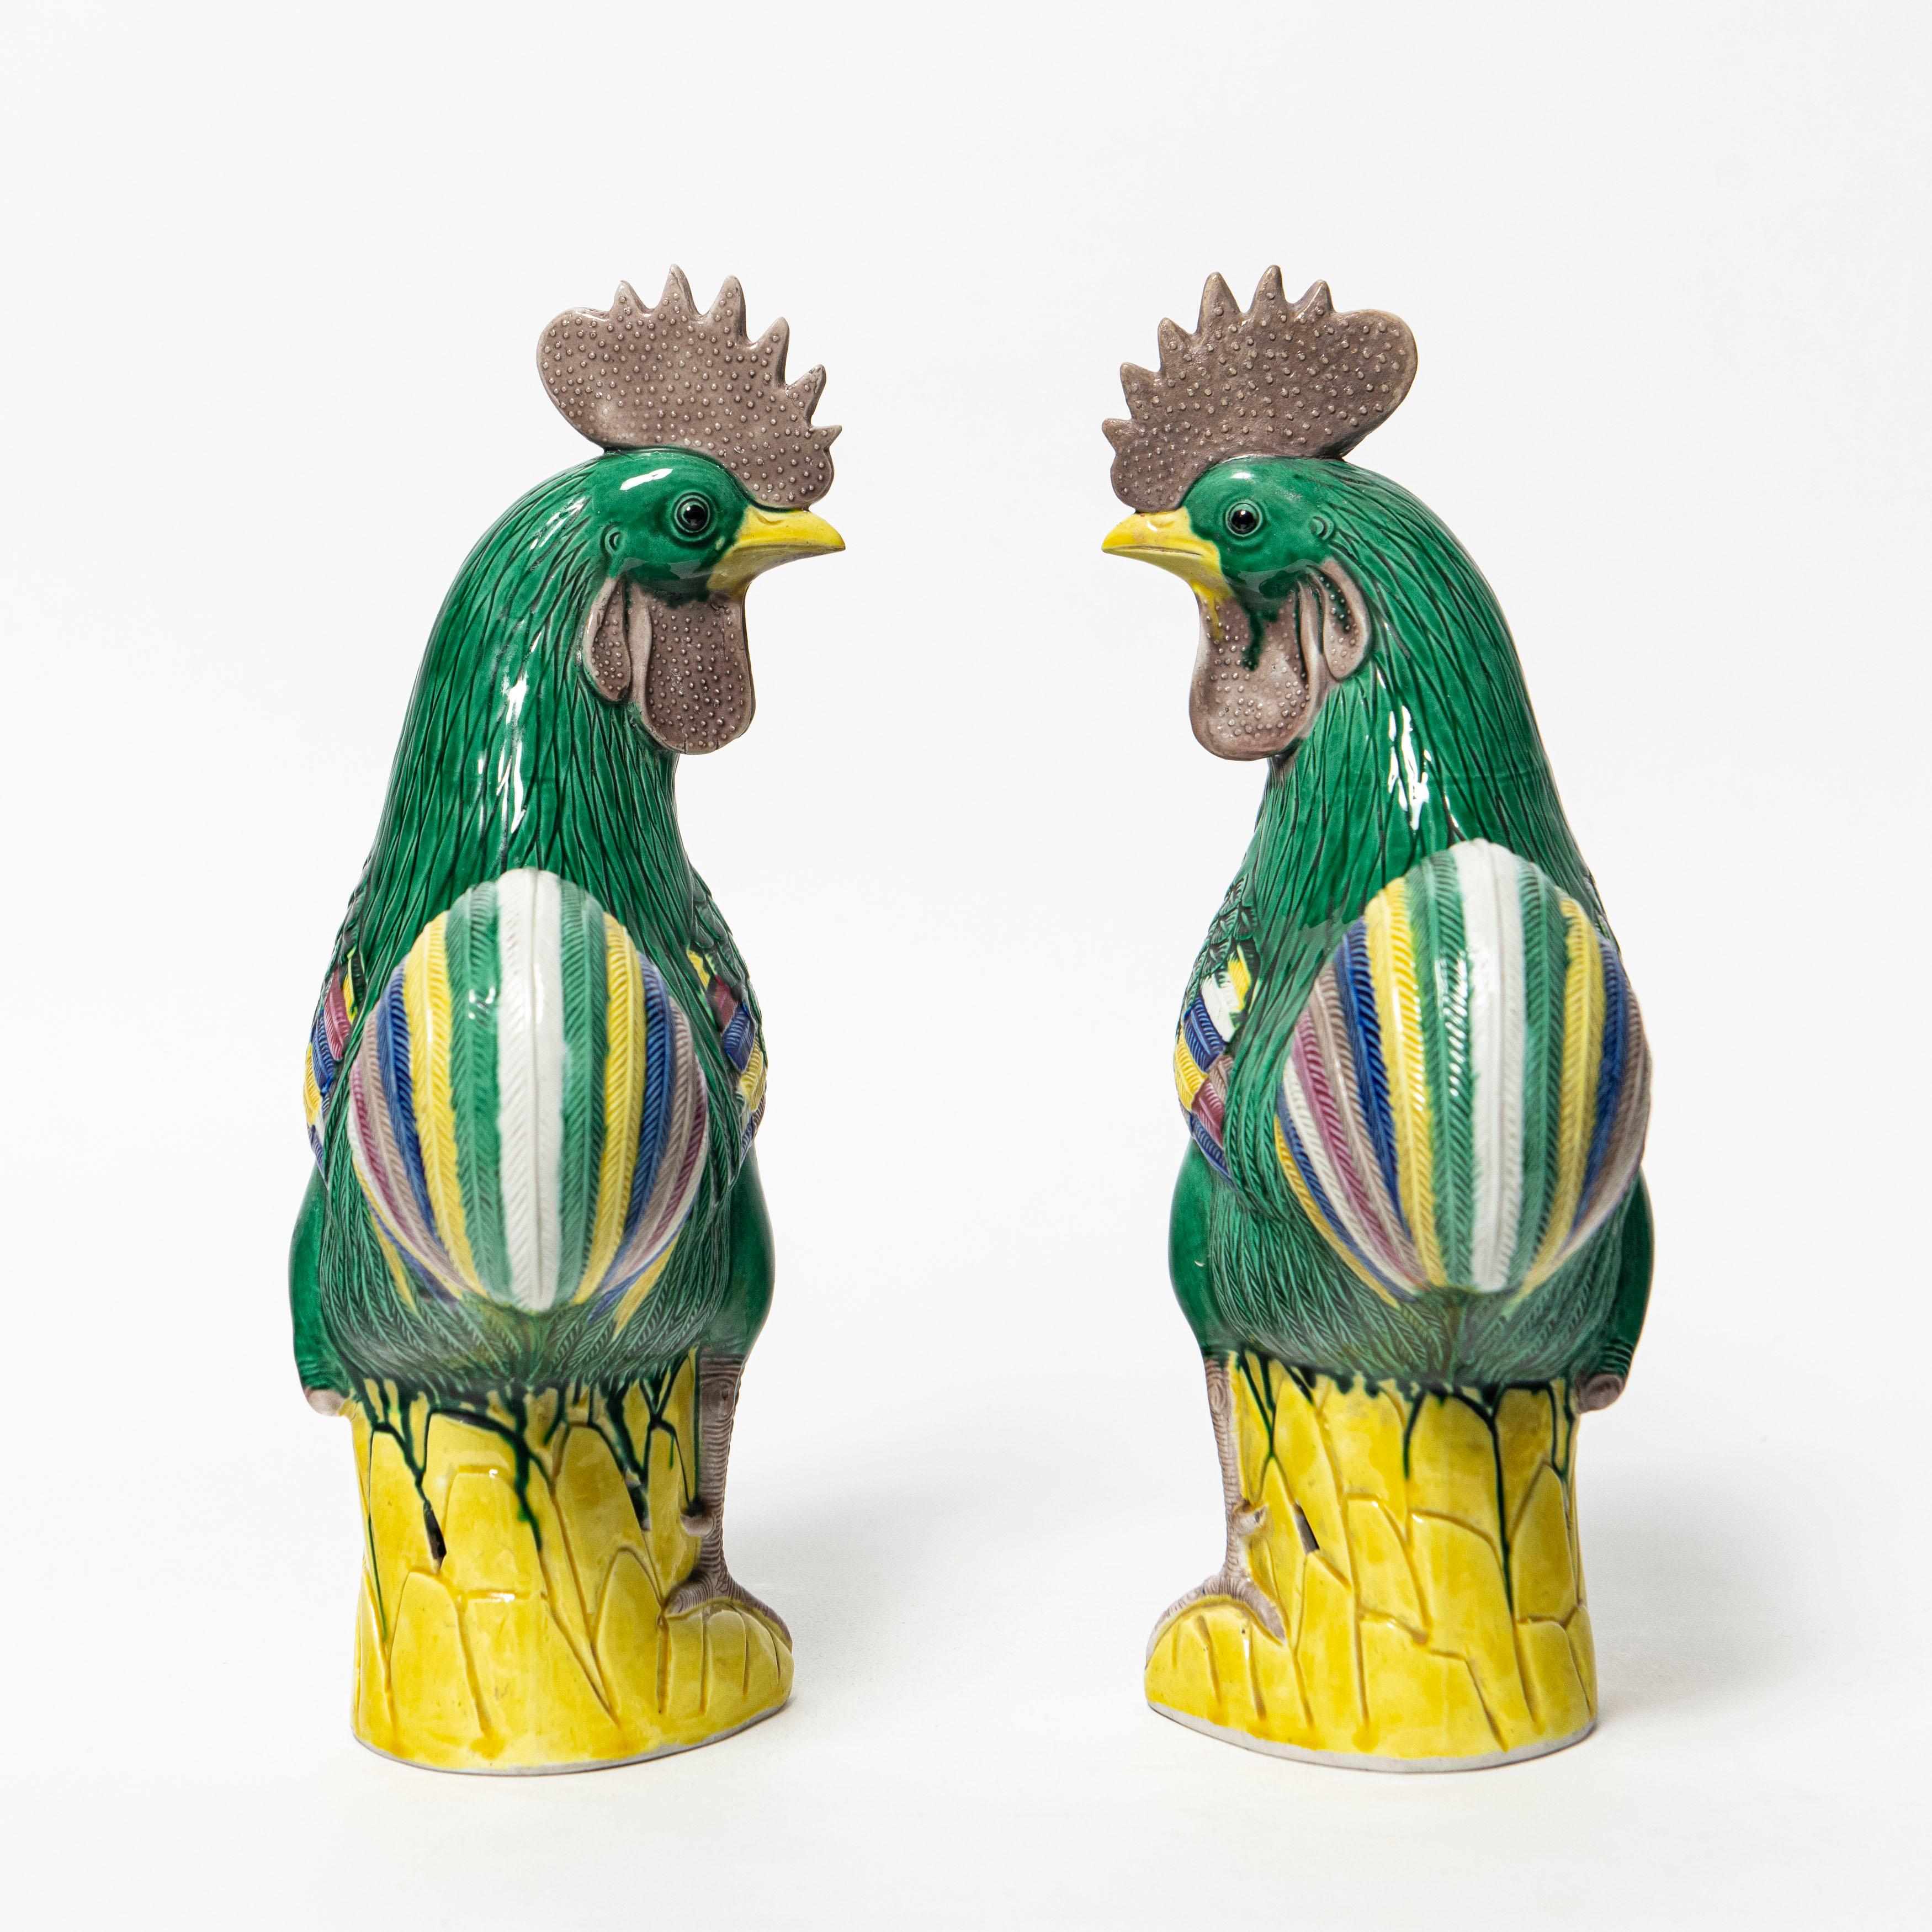 Chinese Export Pair of Porcelain Roosters Sculptures, China, Early 20th Century